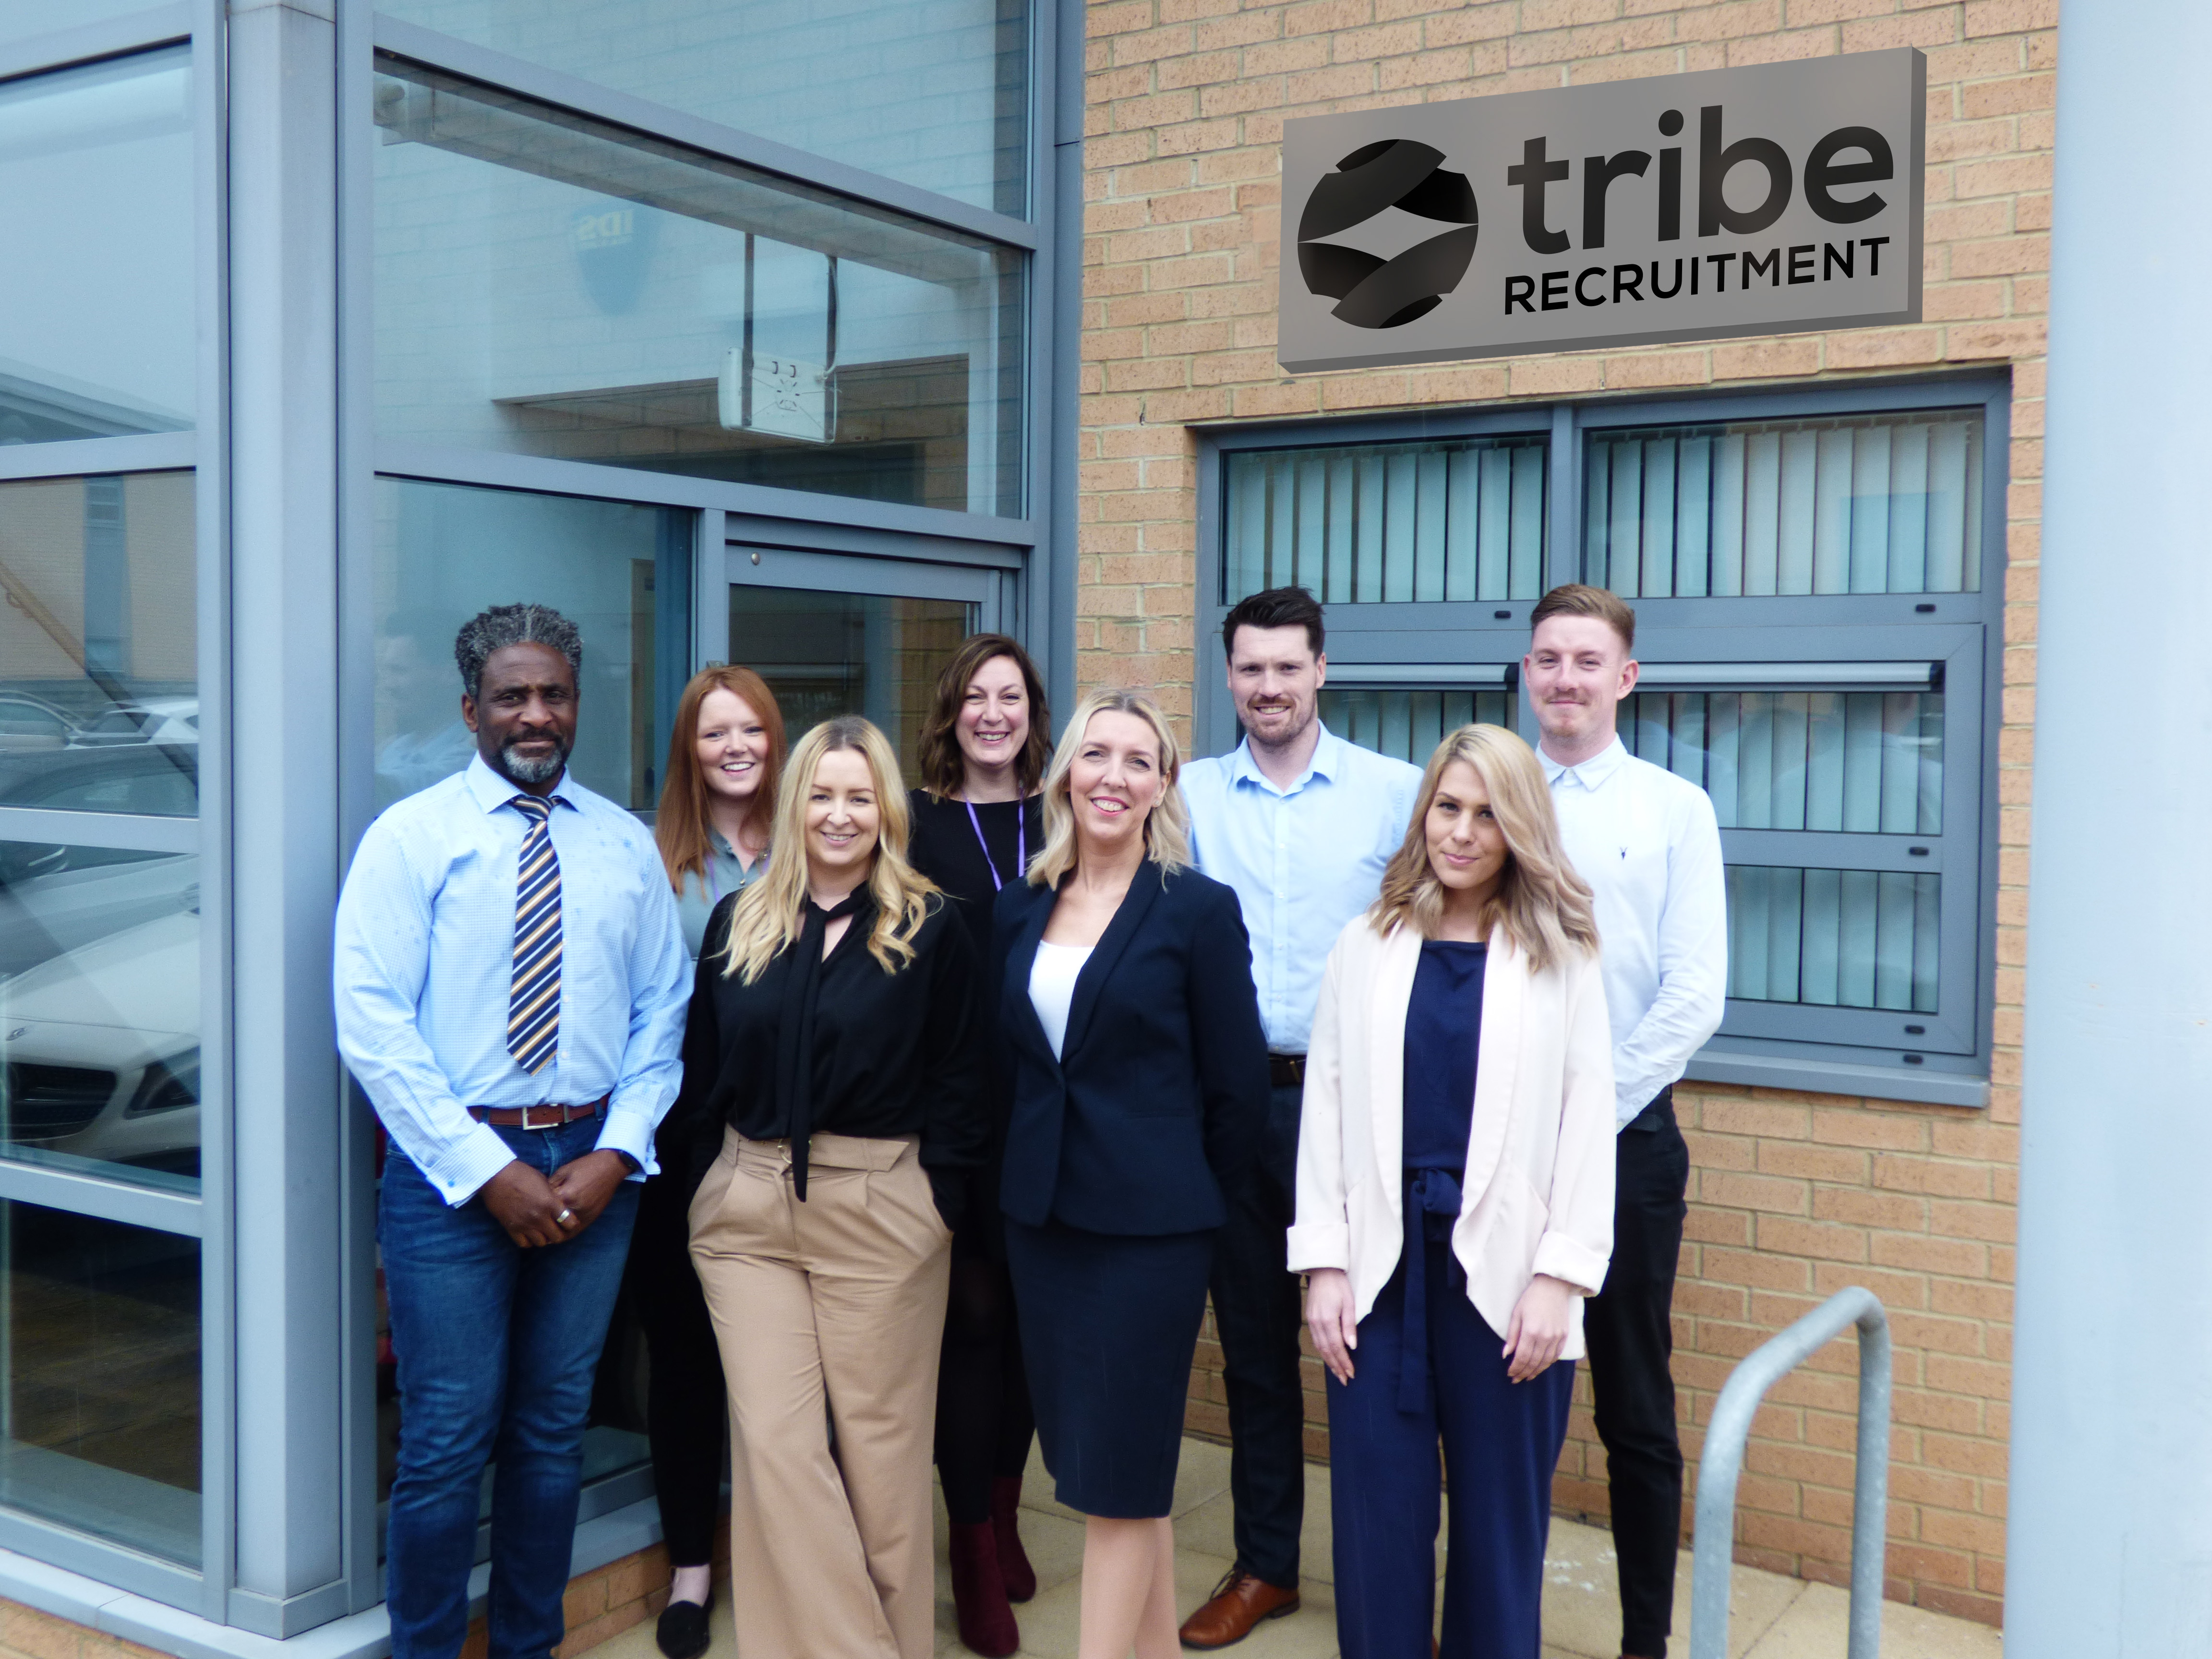 Specialist recruitment firm continues to invest in the region with new office expansion and job creation